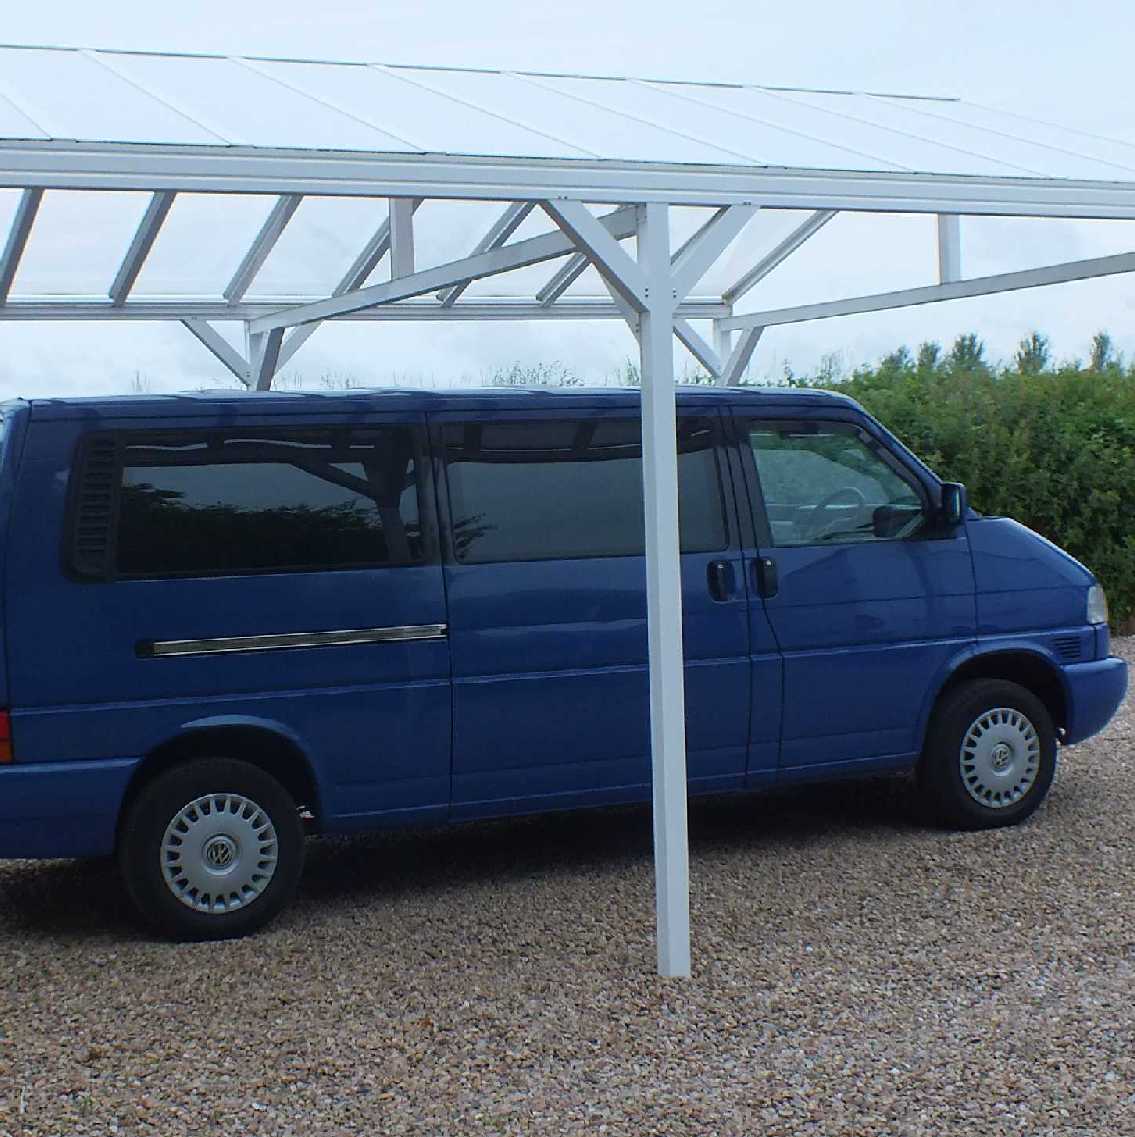 Great deals on Omega Smart Free-Standing, White Gable-Roof (type 1) Canopy with 16mm Polycarbonate Glazing - 5.2m (W) x 3.5m (P), (6) Supporting Posts